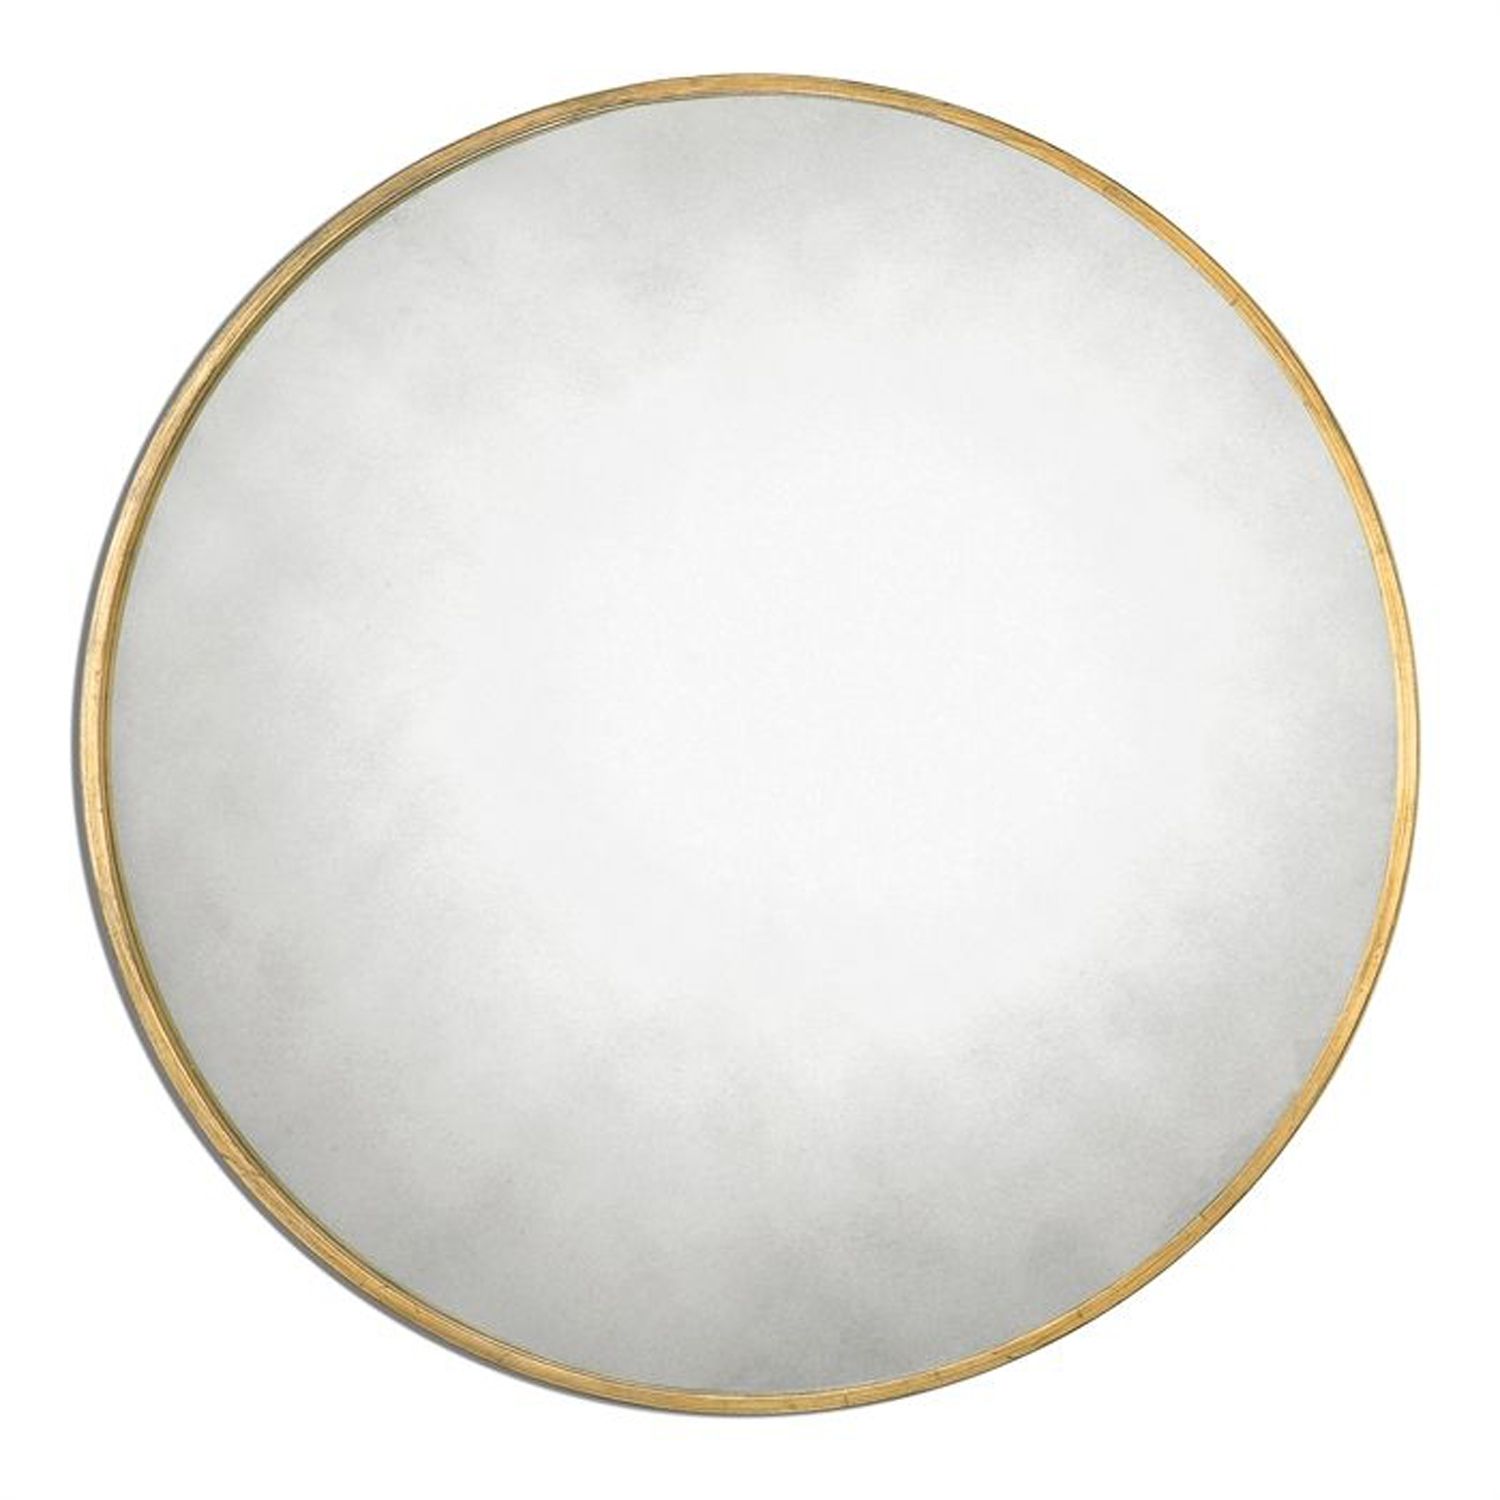 Unique Large Round Mirror 17 For With Large Round Mirror Kitchen Intended For Large Round Metal Mirror (Photo 6 of 15)